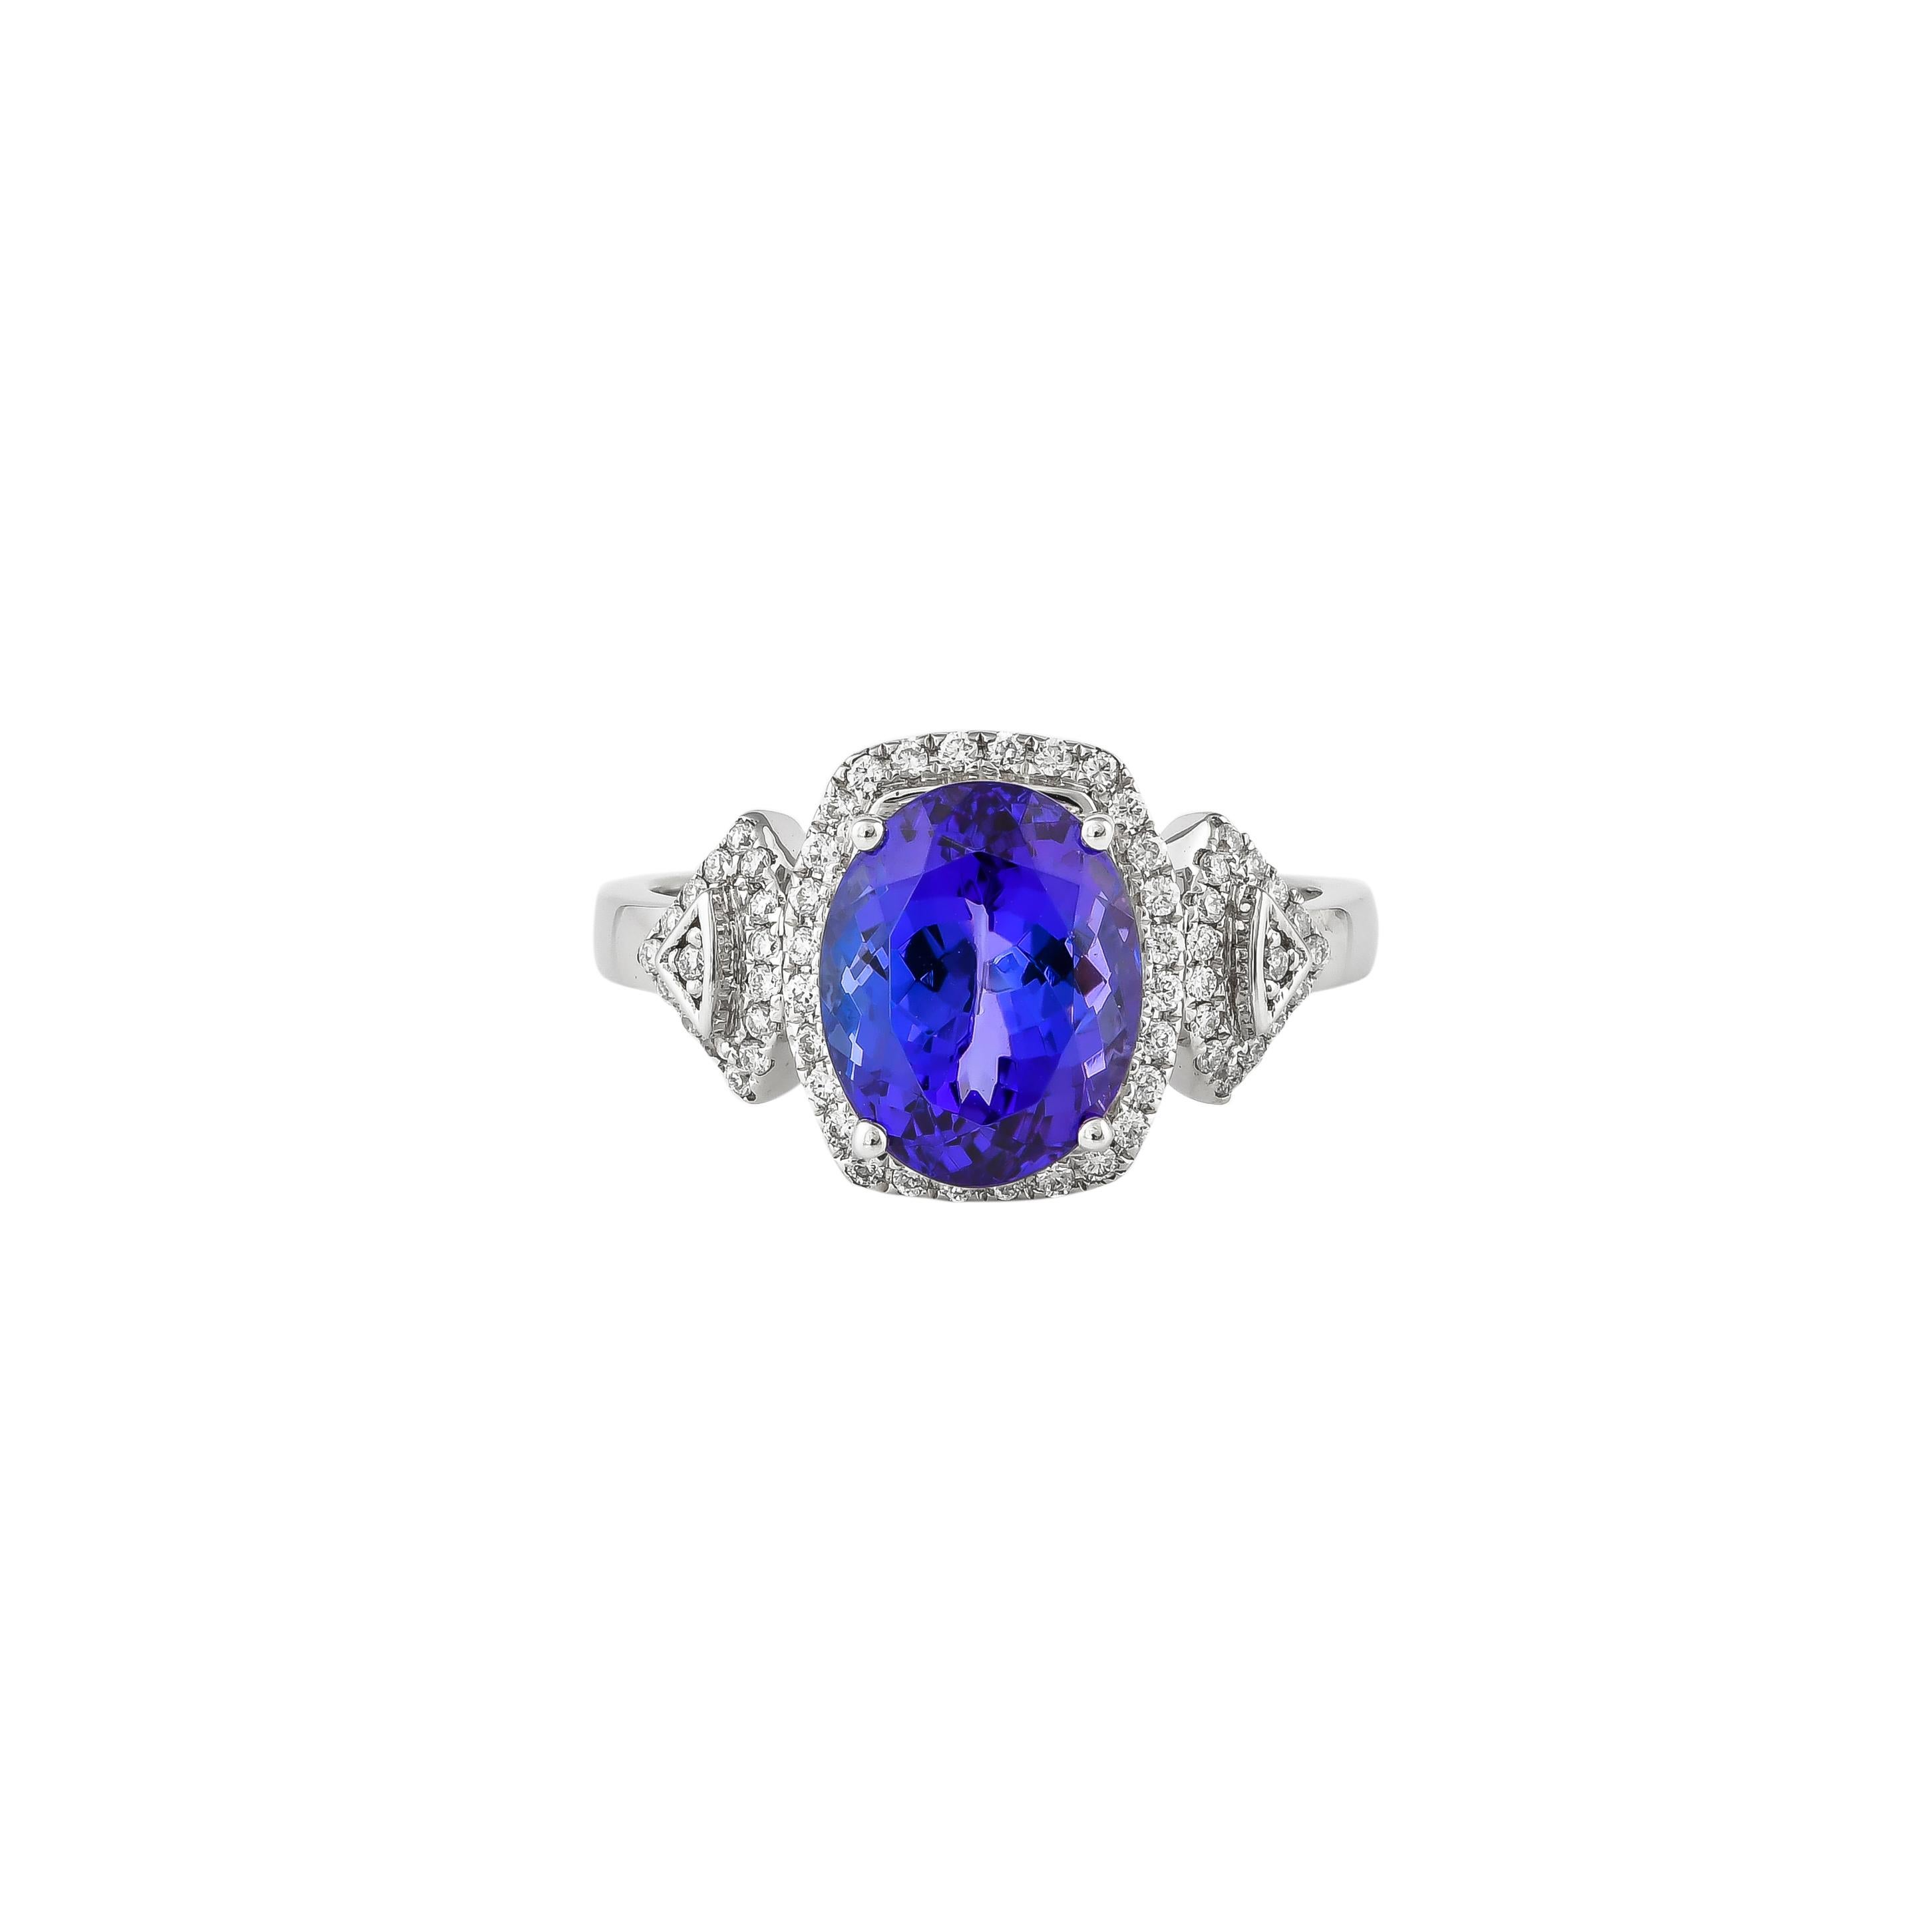 Oval Cut 3.4 Carat Tanzanite and White Diamond Ring in 18 Karat White Gold For Sale